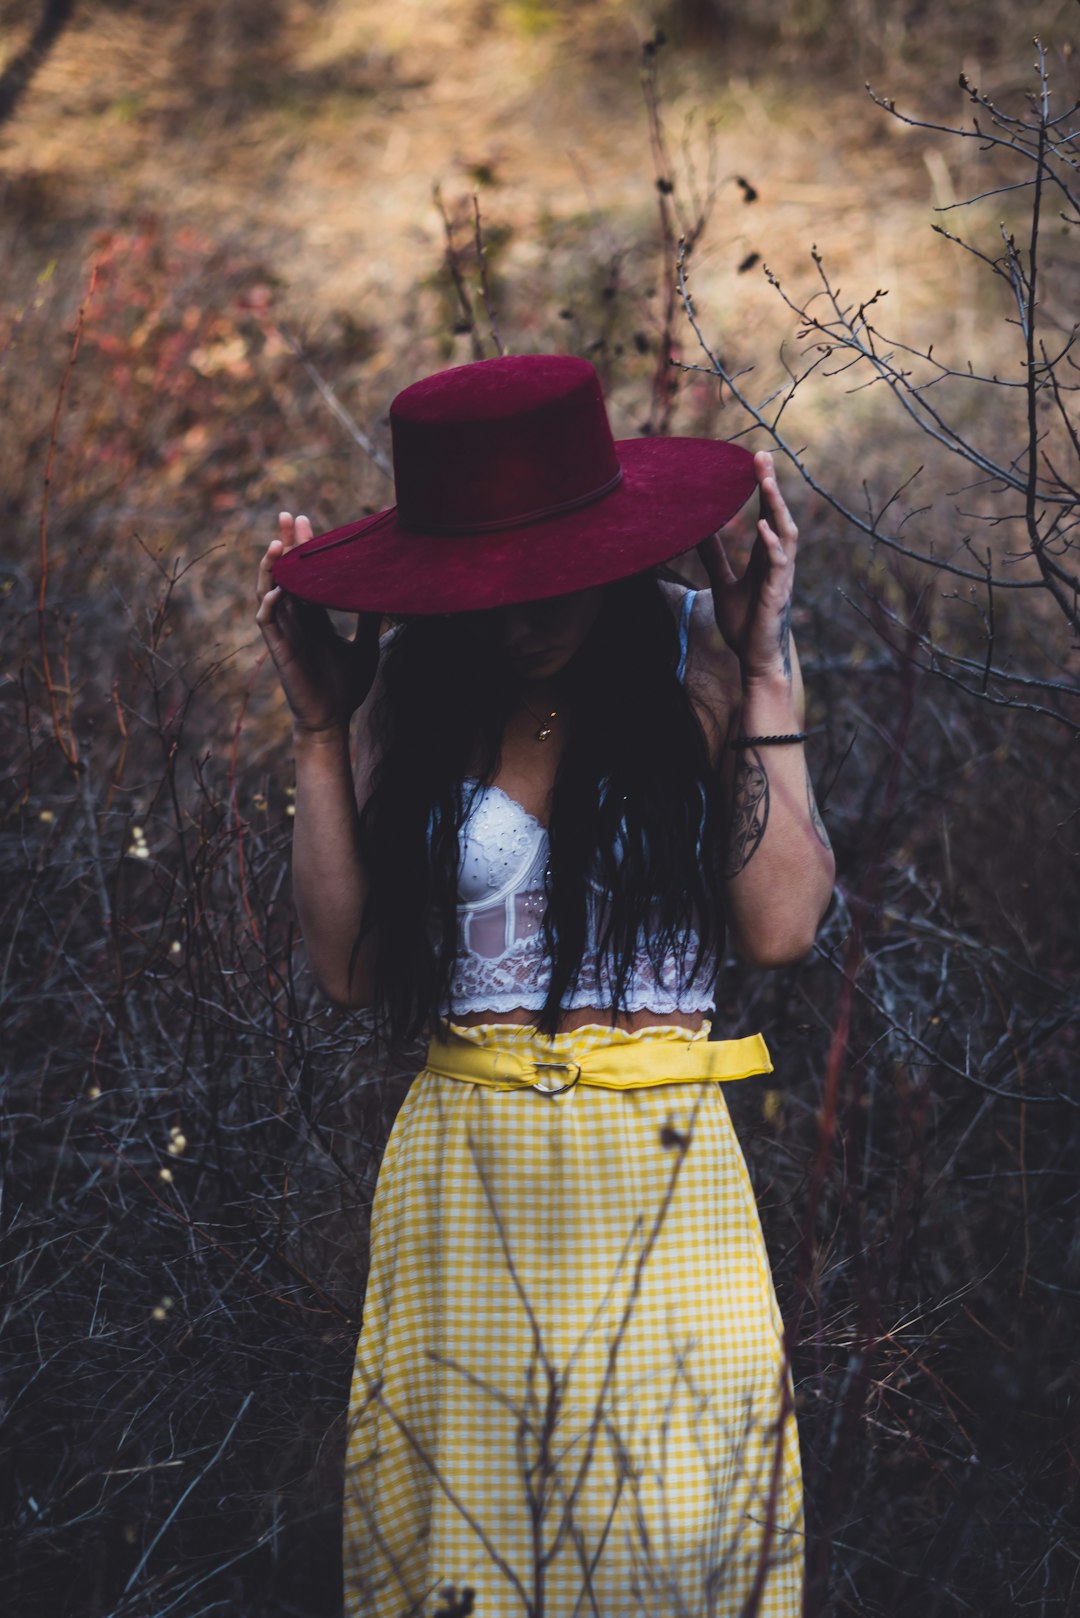 woman in yellow and black plaid dress wearing red hat standing near brown plants